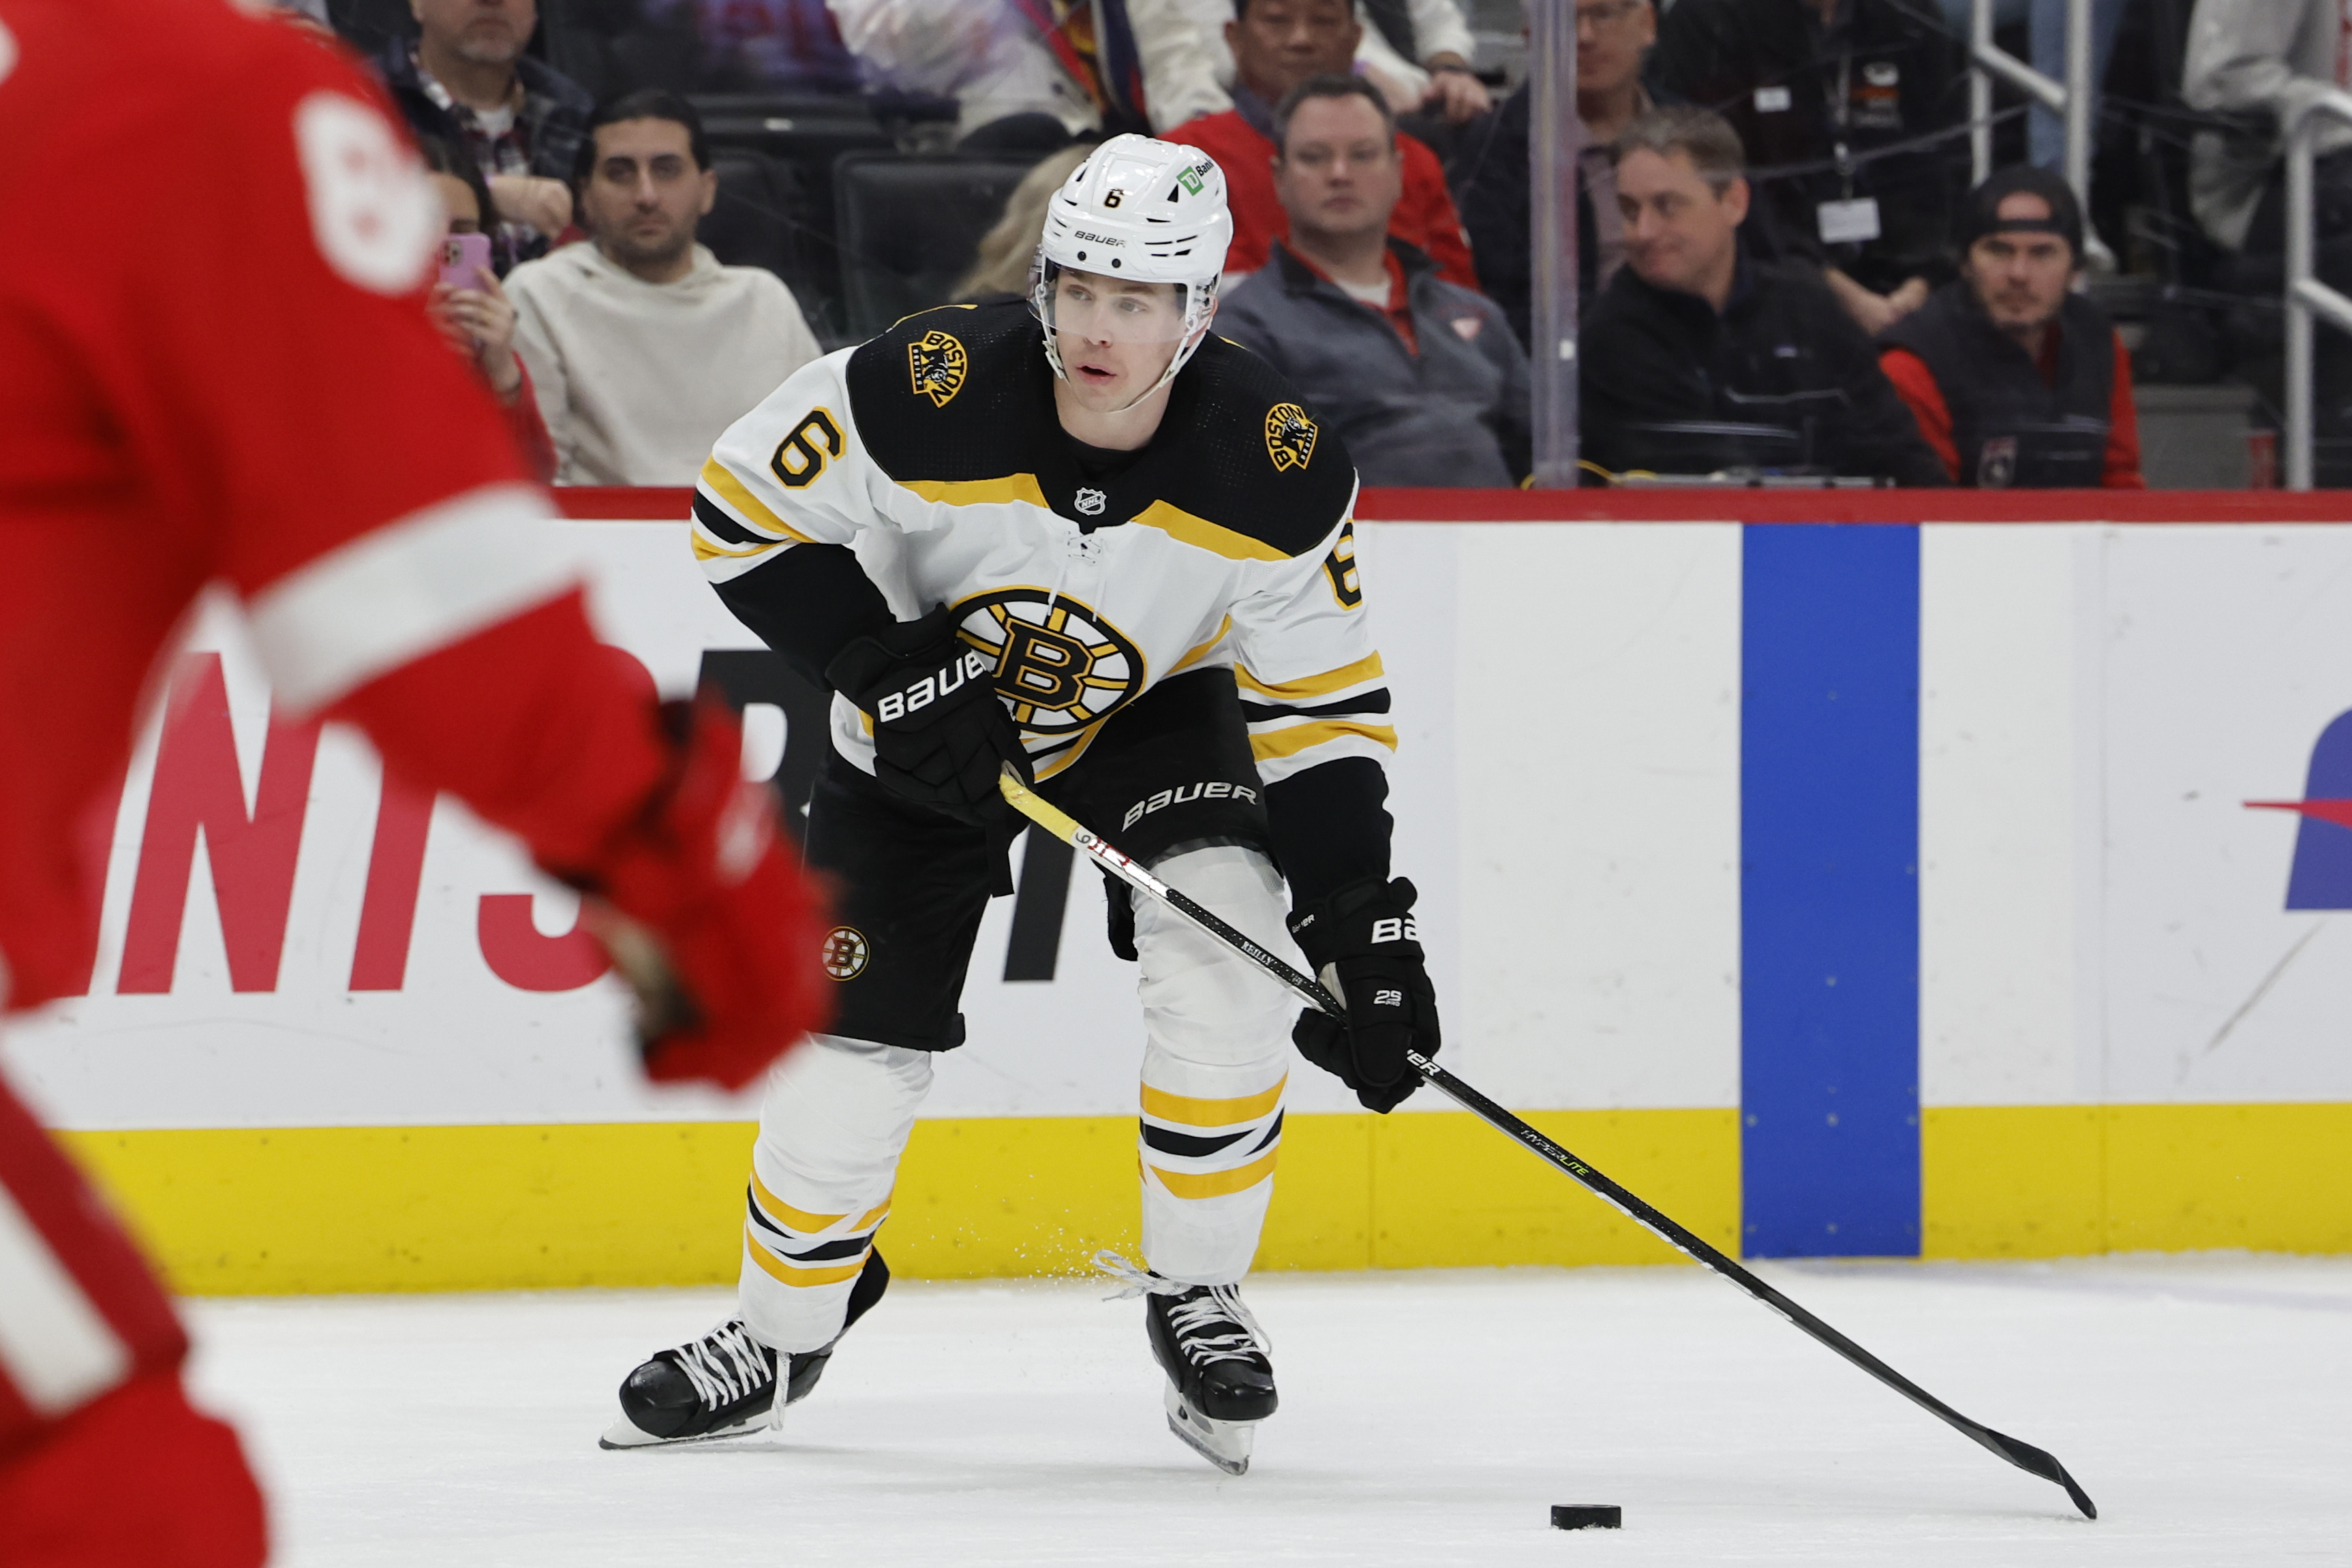 NHL Trade Deadline: Bruins acquire Mike Reilly from Senators